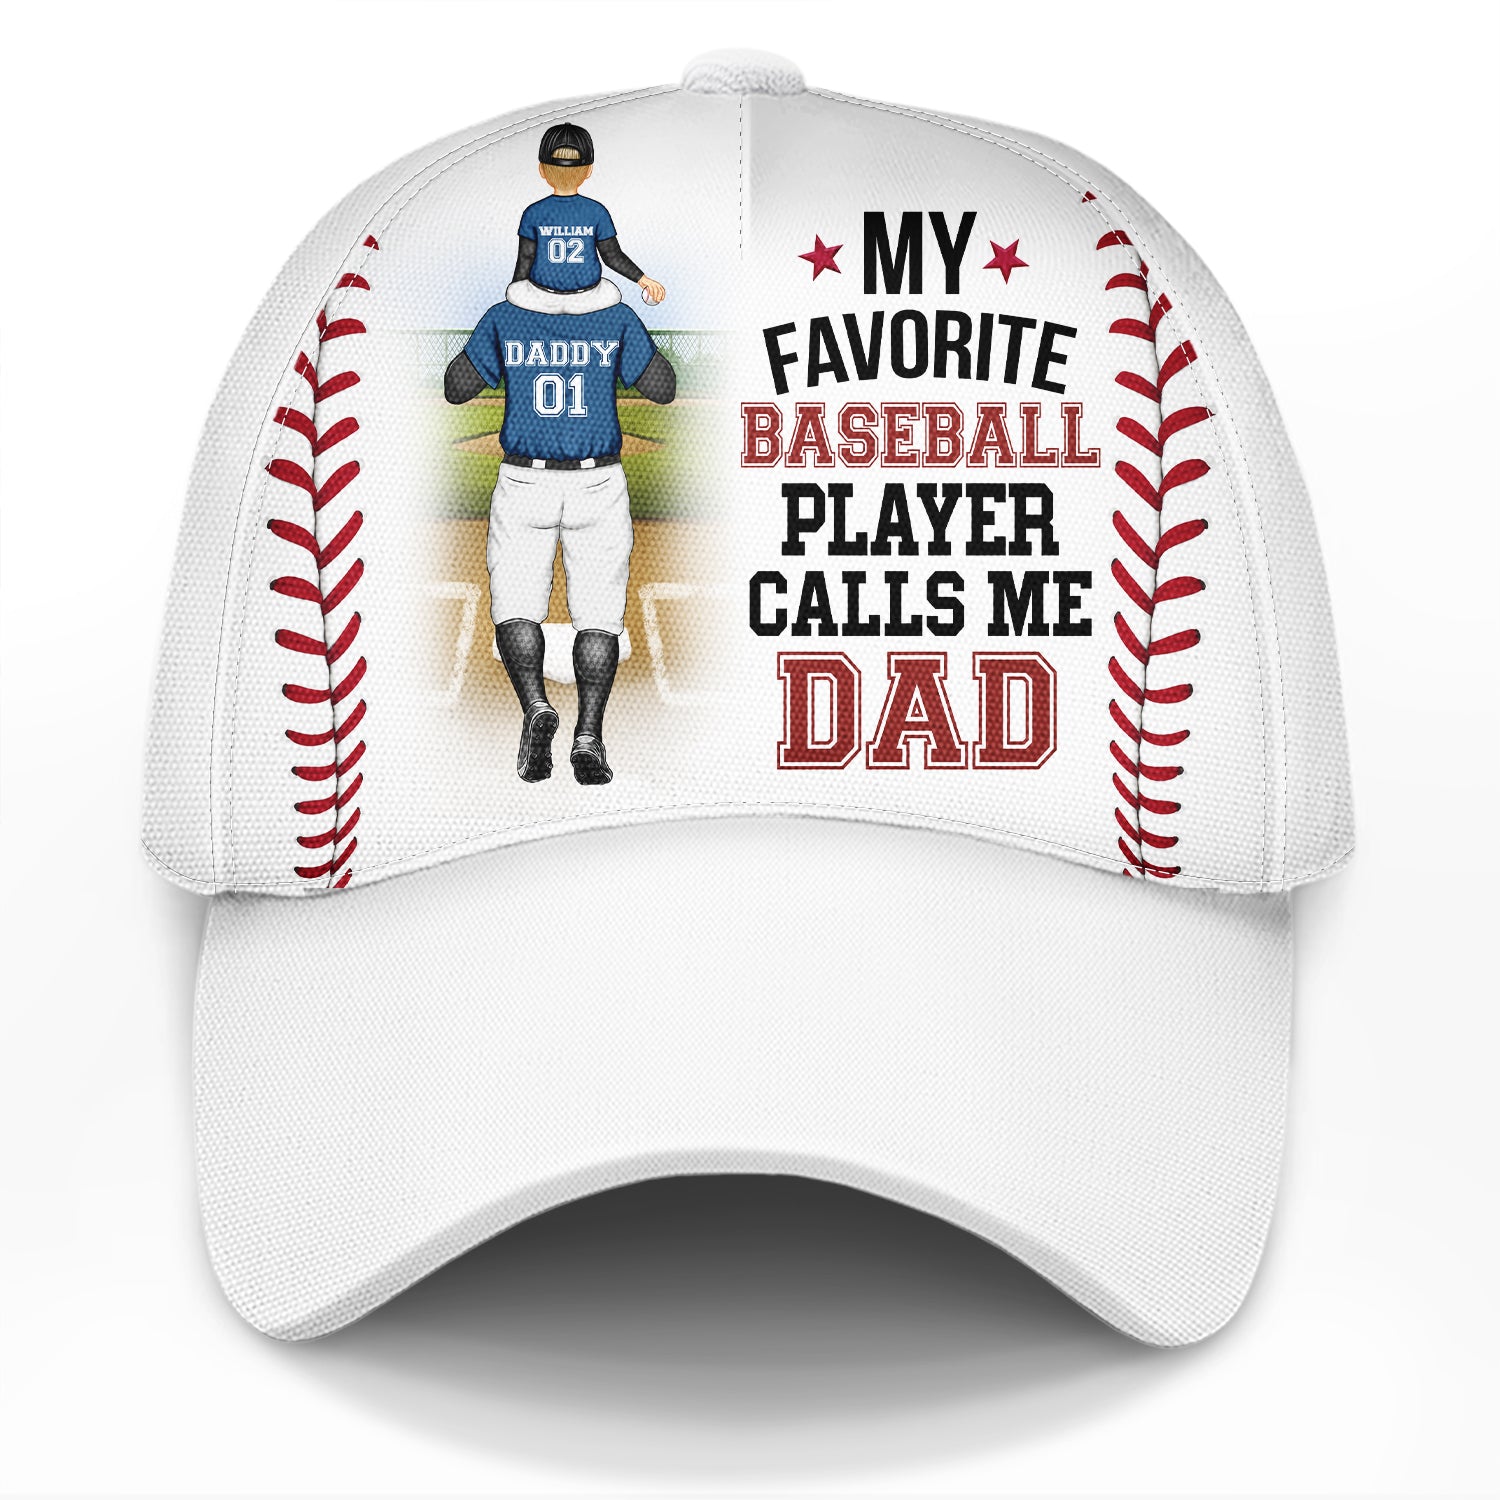 My Favorite Baseball Player Calls Me Dad - Gift For Father, Sport Fans - Personalized Classic Cap